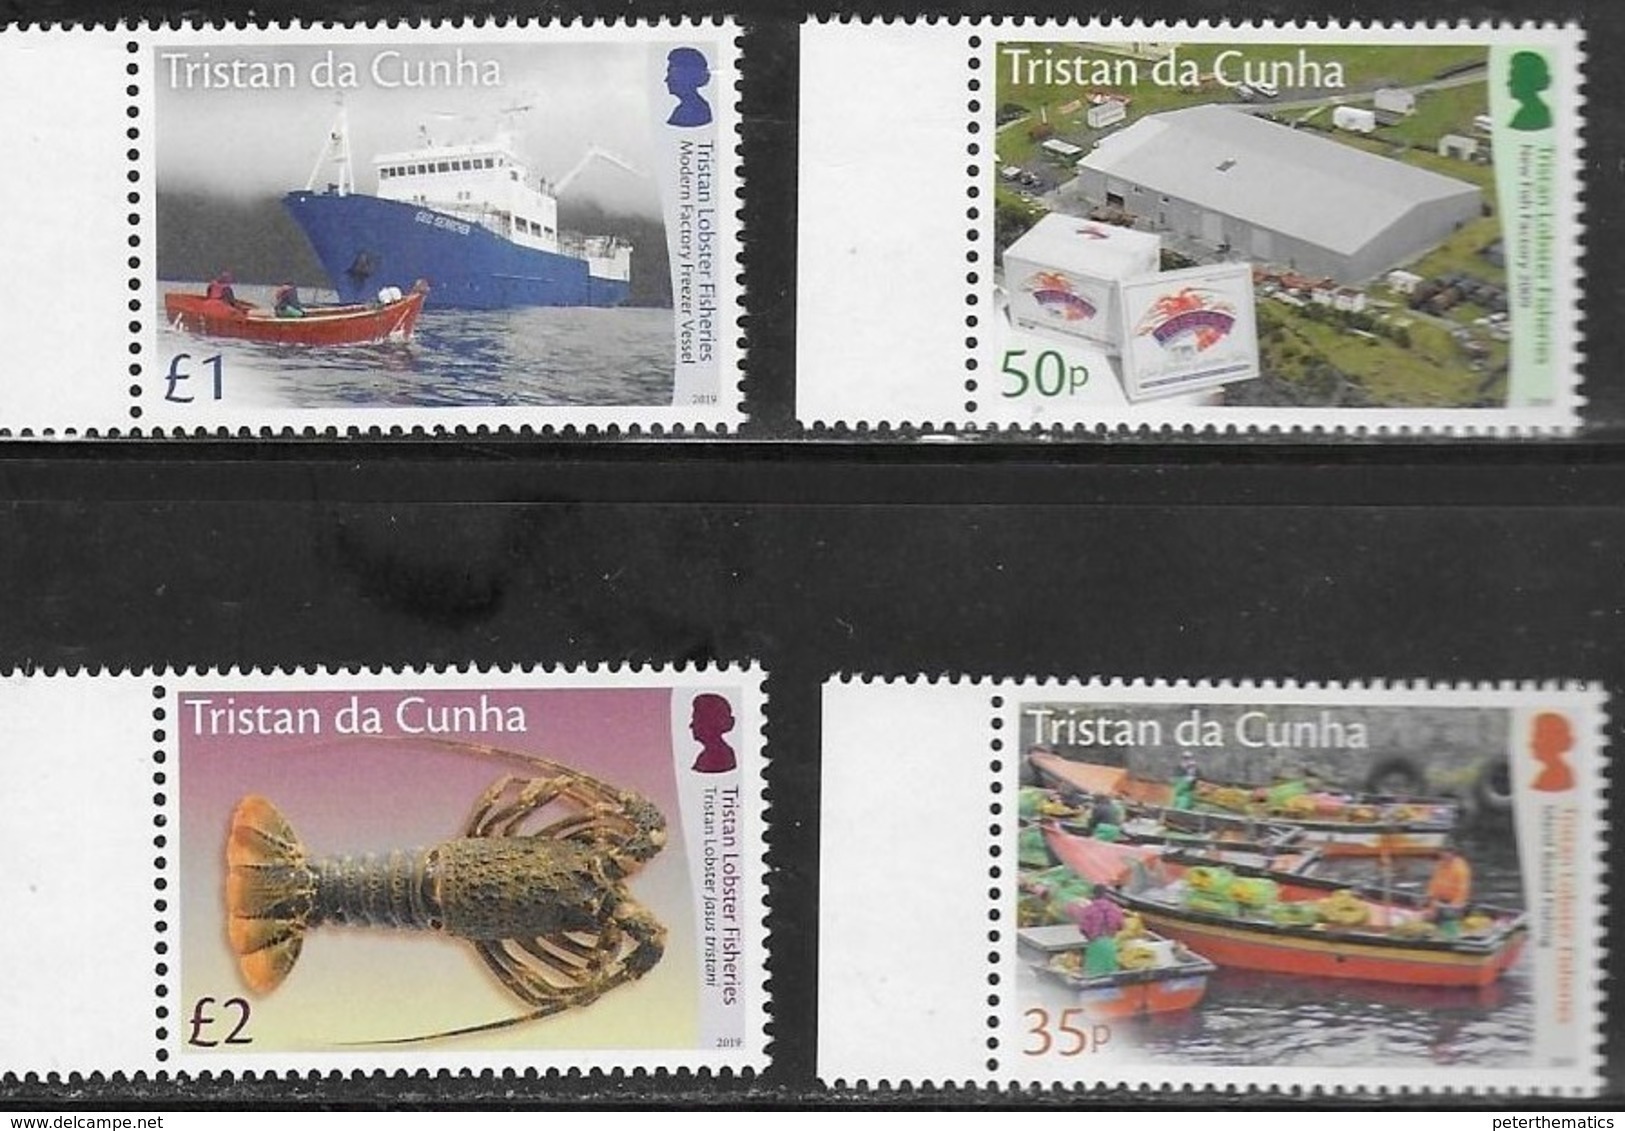 TRISTAN DA CUNHA, 2019, MNH, CRUSTACEANS, LOBSTERS, LOBSTE FISHERIES, BOATS, SHIPS, 4v - Crustáceos